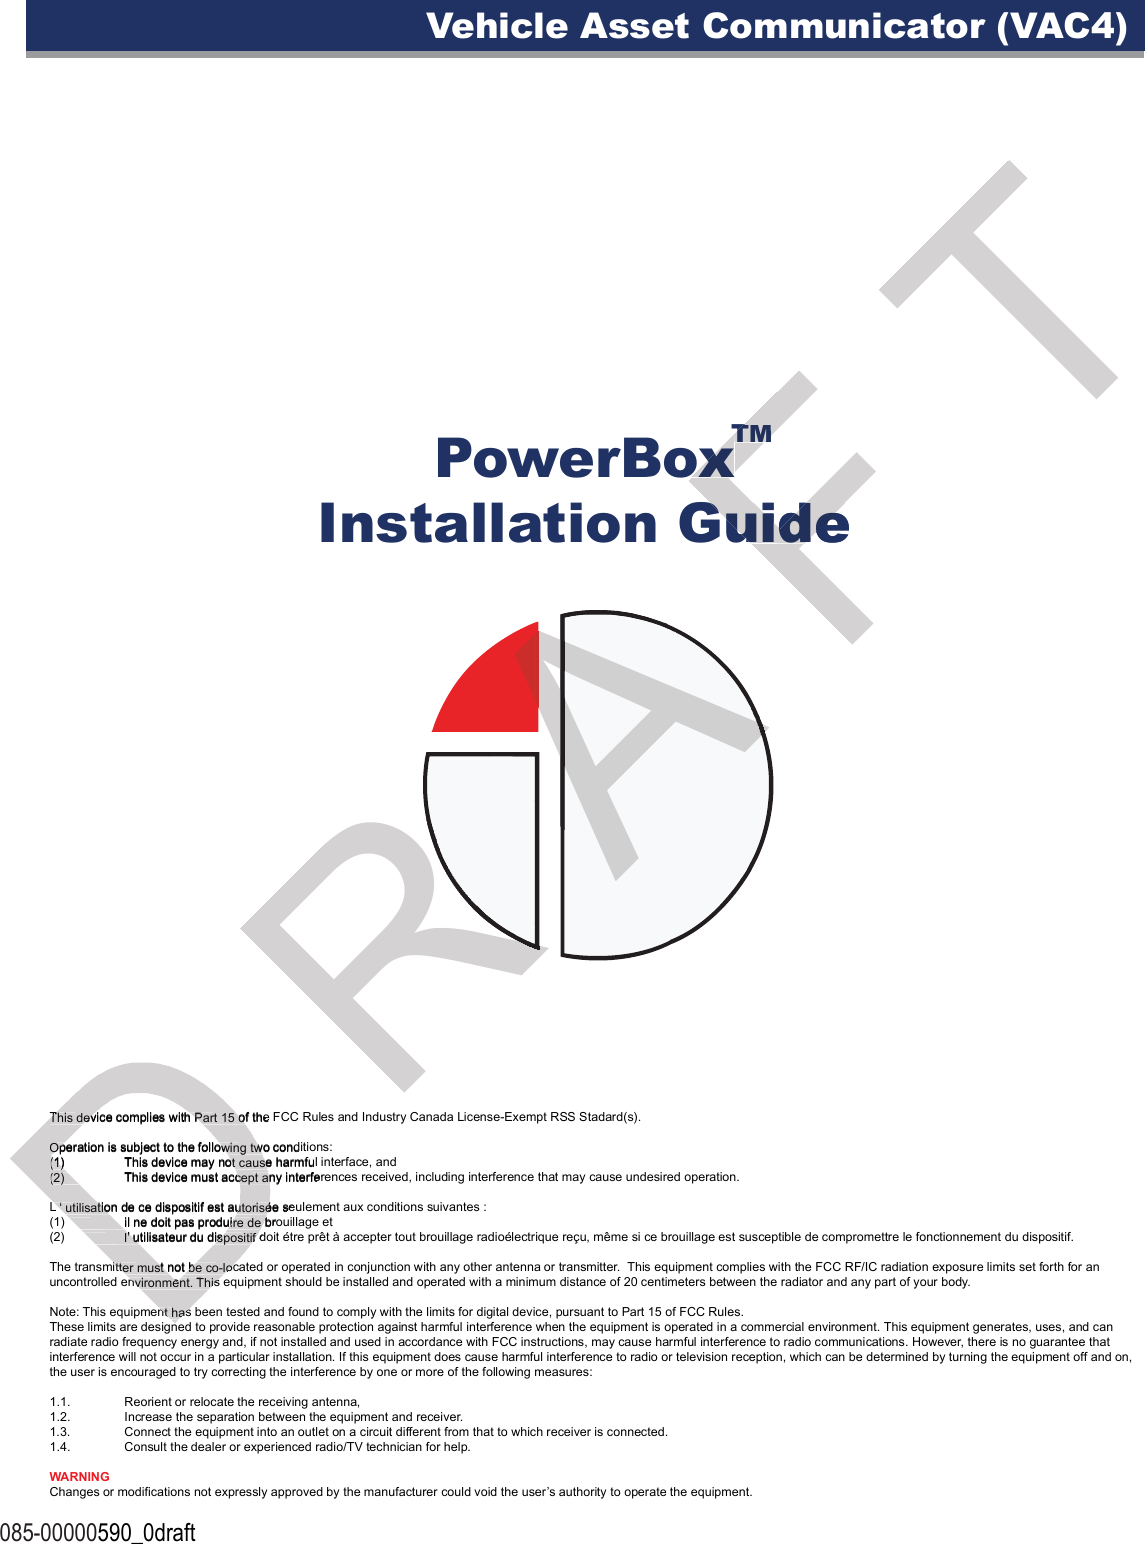 PowerBoxInstallation Guide085-00000590_0draftVehicle Asset Communicator (VAC4)TMThis device complies with Part 15 of the FCC Rules and Industry Canada License-Exempt RSS Stadard(s). Operation is subject to the following two conditions:(1)  This device may not cause harmful interface, and(2)  This device must accept any interferences received, including interference that may cause undesired operation.L ‘ utilisation de ce dispositif est autorisée seulement aux conditions suivantes : (1)   il ne doit pas produire de brouillage et (2)   l’ utilisateur du dispositif doit étre prêt à accepter tout brouillage radioélectrique reçu, même si ce brouillage est susceptible de compromettre le fonctionnement du dispositif.The transmitter must not be co-located or operated in conjunction with any other antenna or transmitter.  This equipment complies with the FCC RF/IC radiation exposure limits set forth for an uncontrolled environment. This equipment should be installed and operated with a minimum distance of 20 centimeters between the radiator and any part of your body.Note: This equipment has been tested and found to comply with the limits for digital device, pursuant to Part 15 of FCC Rules.These limits are designed to provide reasonable protection against harmful interference when the equipment is operated in a commercial environment. This equipment generates, uses, and can radiate radio frequency energy and, if not installed and used in accordance with FCC instructions, may cause harmful interference to radio communications. However, there is no guarantee that interference will not occur in a particular installation. If this equipment does cause harmful interference to radio or television reception, which can be determined by turning the equipment off and on, the user is encouraged to try correcting the interference by one or more of the following measures:1.1.  Reorient or relocate the receiving antenna,1.2.  Increase the separation between the equipment and receiver.1.3.  Connect the equipment into an outlet on a circuit different from that to which receiver is connected.1.4.  Consult the dealer or experienced radio/TV technician for help.WARNINGChanges or modifications not expressly approved by the manufacturer could void the user’s authority to operate the equipment.This device complies with Part 15 of the FCC Rules and Industry Canada License-Exempt RSS Stadard(s). This device complies with Part 15 of the FCC Rules and Industry Canada License-Exempt RSS Stadard(s). Operation is subject to the following two conditions:Operation is subject to the following two conditions:(1)  This device may not cause harmful interface, and(1)  This device may not cause harmful interface, and(2)  This device must accept any interferences received, including interference that may cause undesired operation.(2)  This device must accept any interferences received, including interference that may cause undesired operation.L ‘ utilisation de ce dispositif est autorisée seulement aux conditions suivantes : L ‘ utilisation de ce dispositif est autorisée seulement aux conditions suivantes : (1)   il ne doit pas produire de brouillage et (1)   il ne doit pas produire de brouillage et (2)   l’ utilisateur du dispositif doit étre prêt à accepter tout brouillage radioélectrique reçu, même si ce brouillage est susceptible de compromettre le fonctionnement du dispositif.(2)   l’ utilisateur du dispositif doit étre prêt à accepter tout brouillage radioélectrique reçu, même si ce brouillage est susceptible de compromettre le fonctionnement du dispositif.The transmitter must not be co-located or operated in conjunction with any other antenna or transmitter.  This equipment complies with the FCC RF/IC radiation exposure limits set forth for an The transmitter must not be co-located or operated in conjunction with any other antenna or transmitter.  This equipment complies with the FCC RF/IC radiation exposure limits set forth for an uncontrolled environment. This equipment should be installed and operated with a minimum distance of 20 centimeters between the radiator and any part of your body.uncontrolled environment. This equipment should be installed and operated with a minimum distance of 20 centimeters between the radiator and any part of your body.Note: This equipment has been tested and found to comply with the limits for digital device, pursuant to Part 15 of FCC Rules.Note: This equipment has been tested and found to comply with the limits for digital device, pursuant to Part 15 of FCC Rules.These limits are designed to provide reasonable protection against harmful interference when the equipment is operated in a commercial environment. R R R A A A A A A A A F PowerBoxPowerBoxInstallation GuideInstallation GuideTMTMPowerBoxPowerBoxT